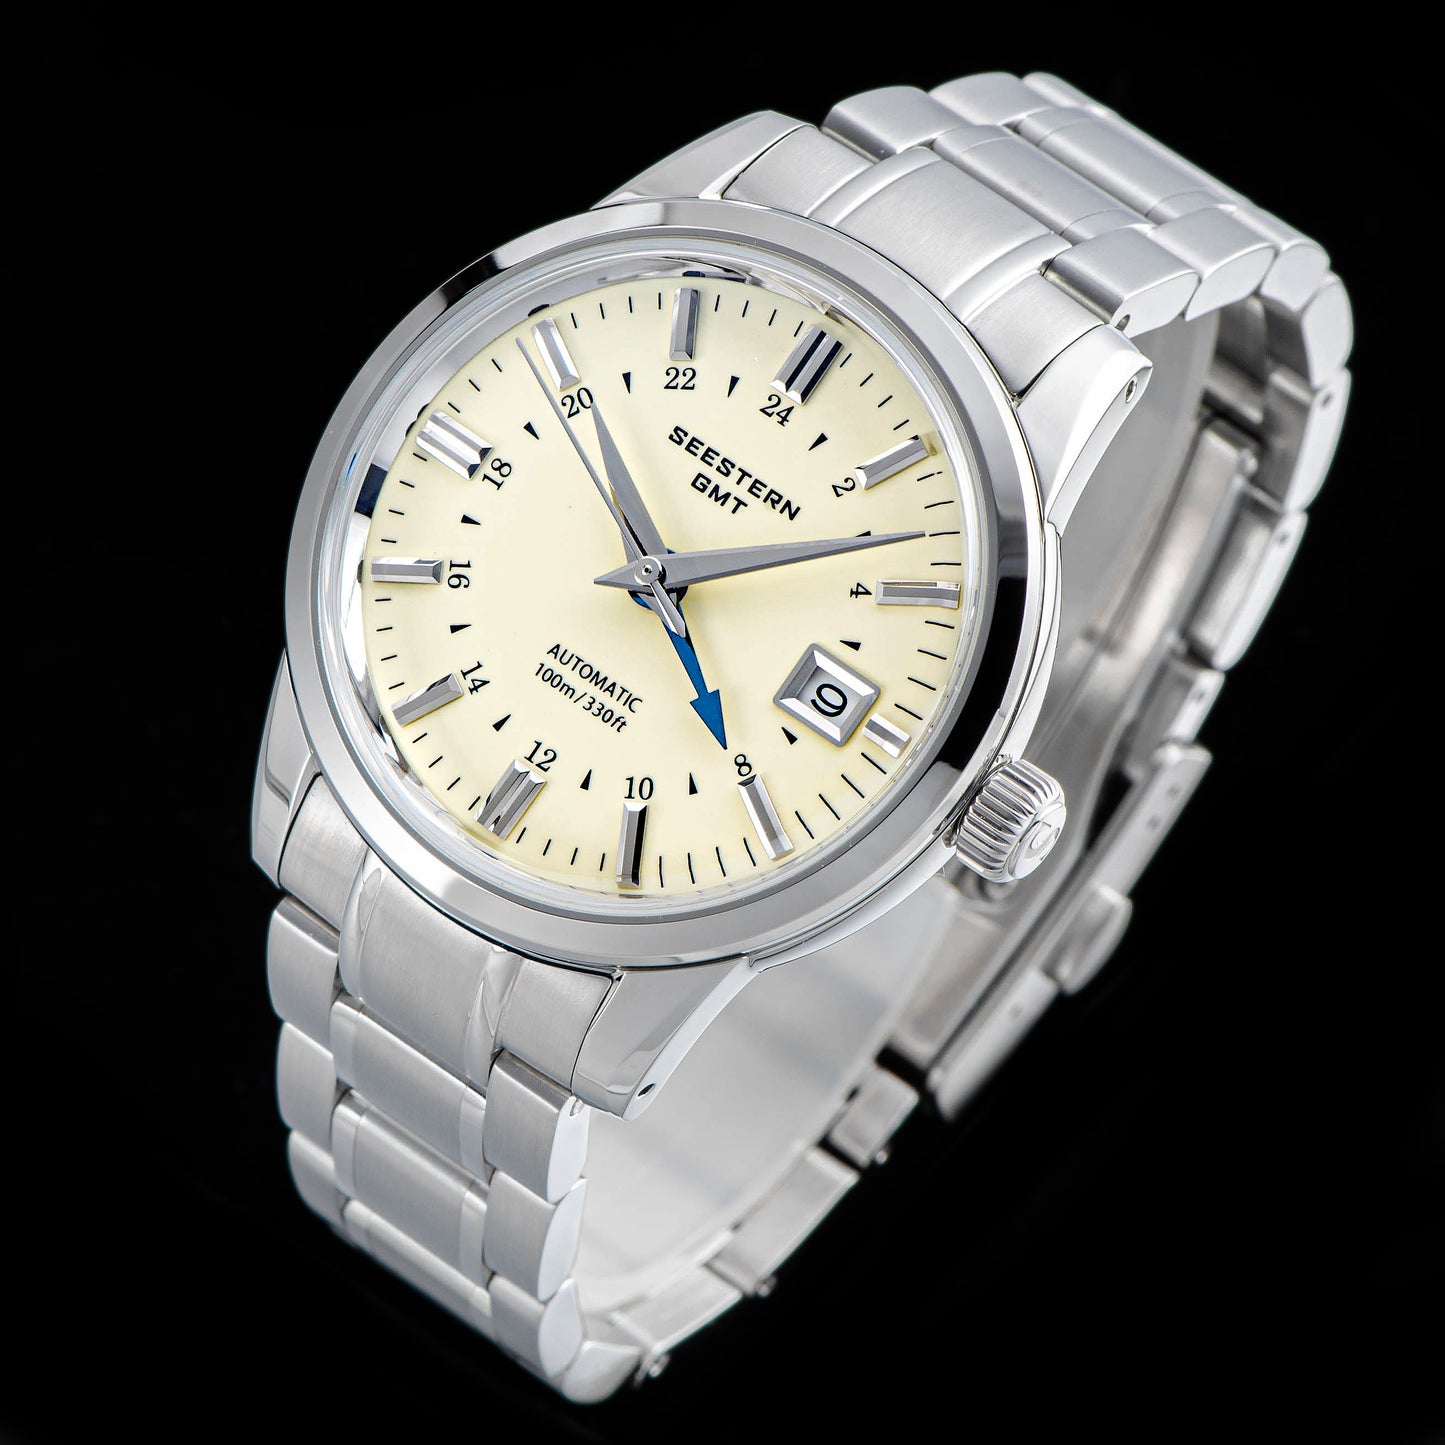 Seestern S446 GMT Watch Creamy Dial (Seiko NH34 GMT movement)